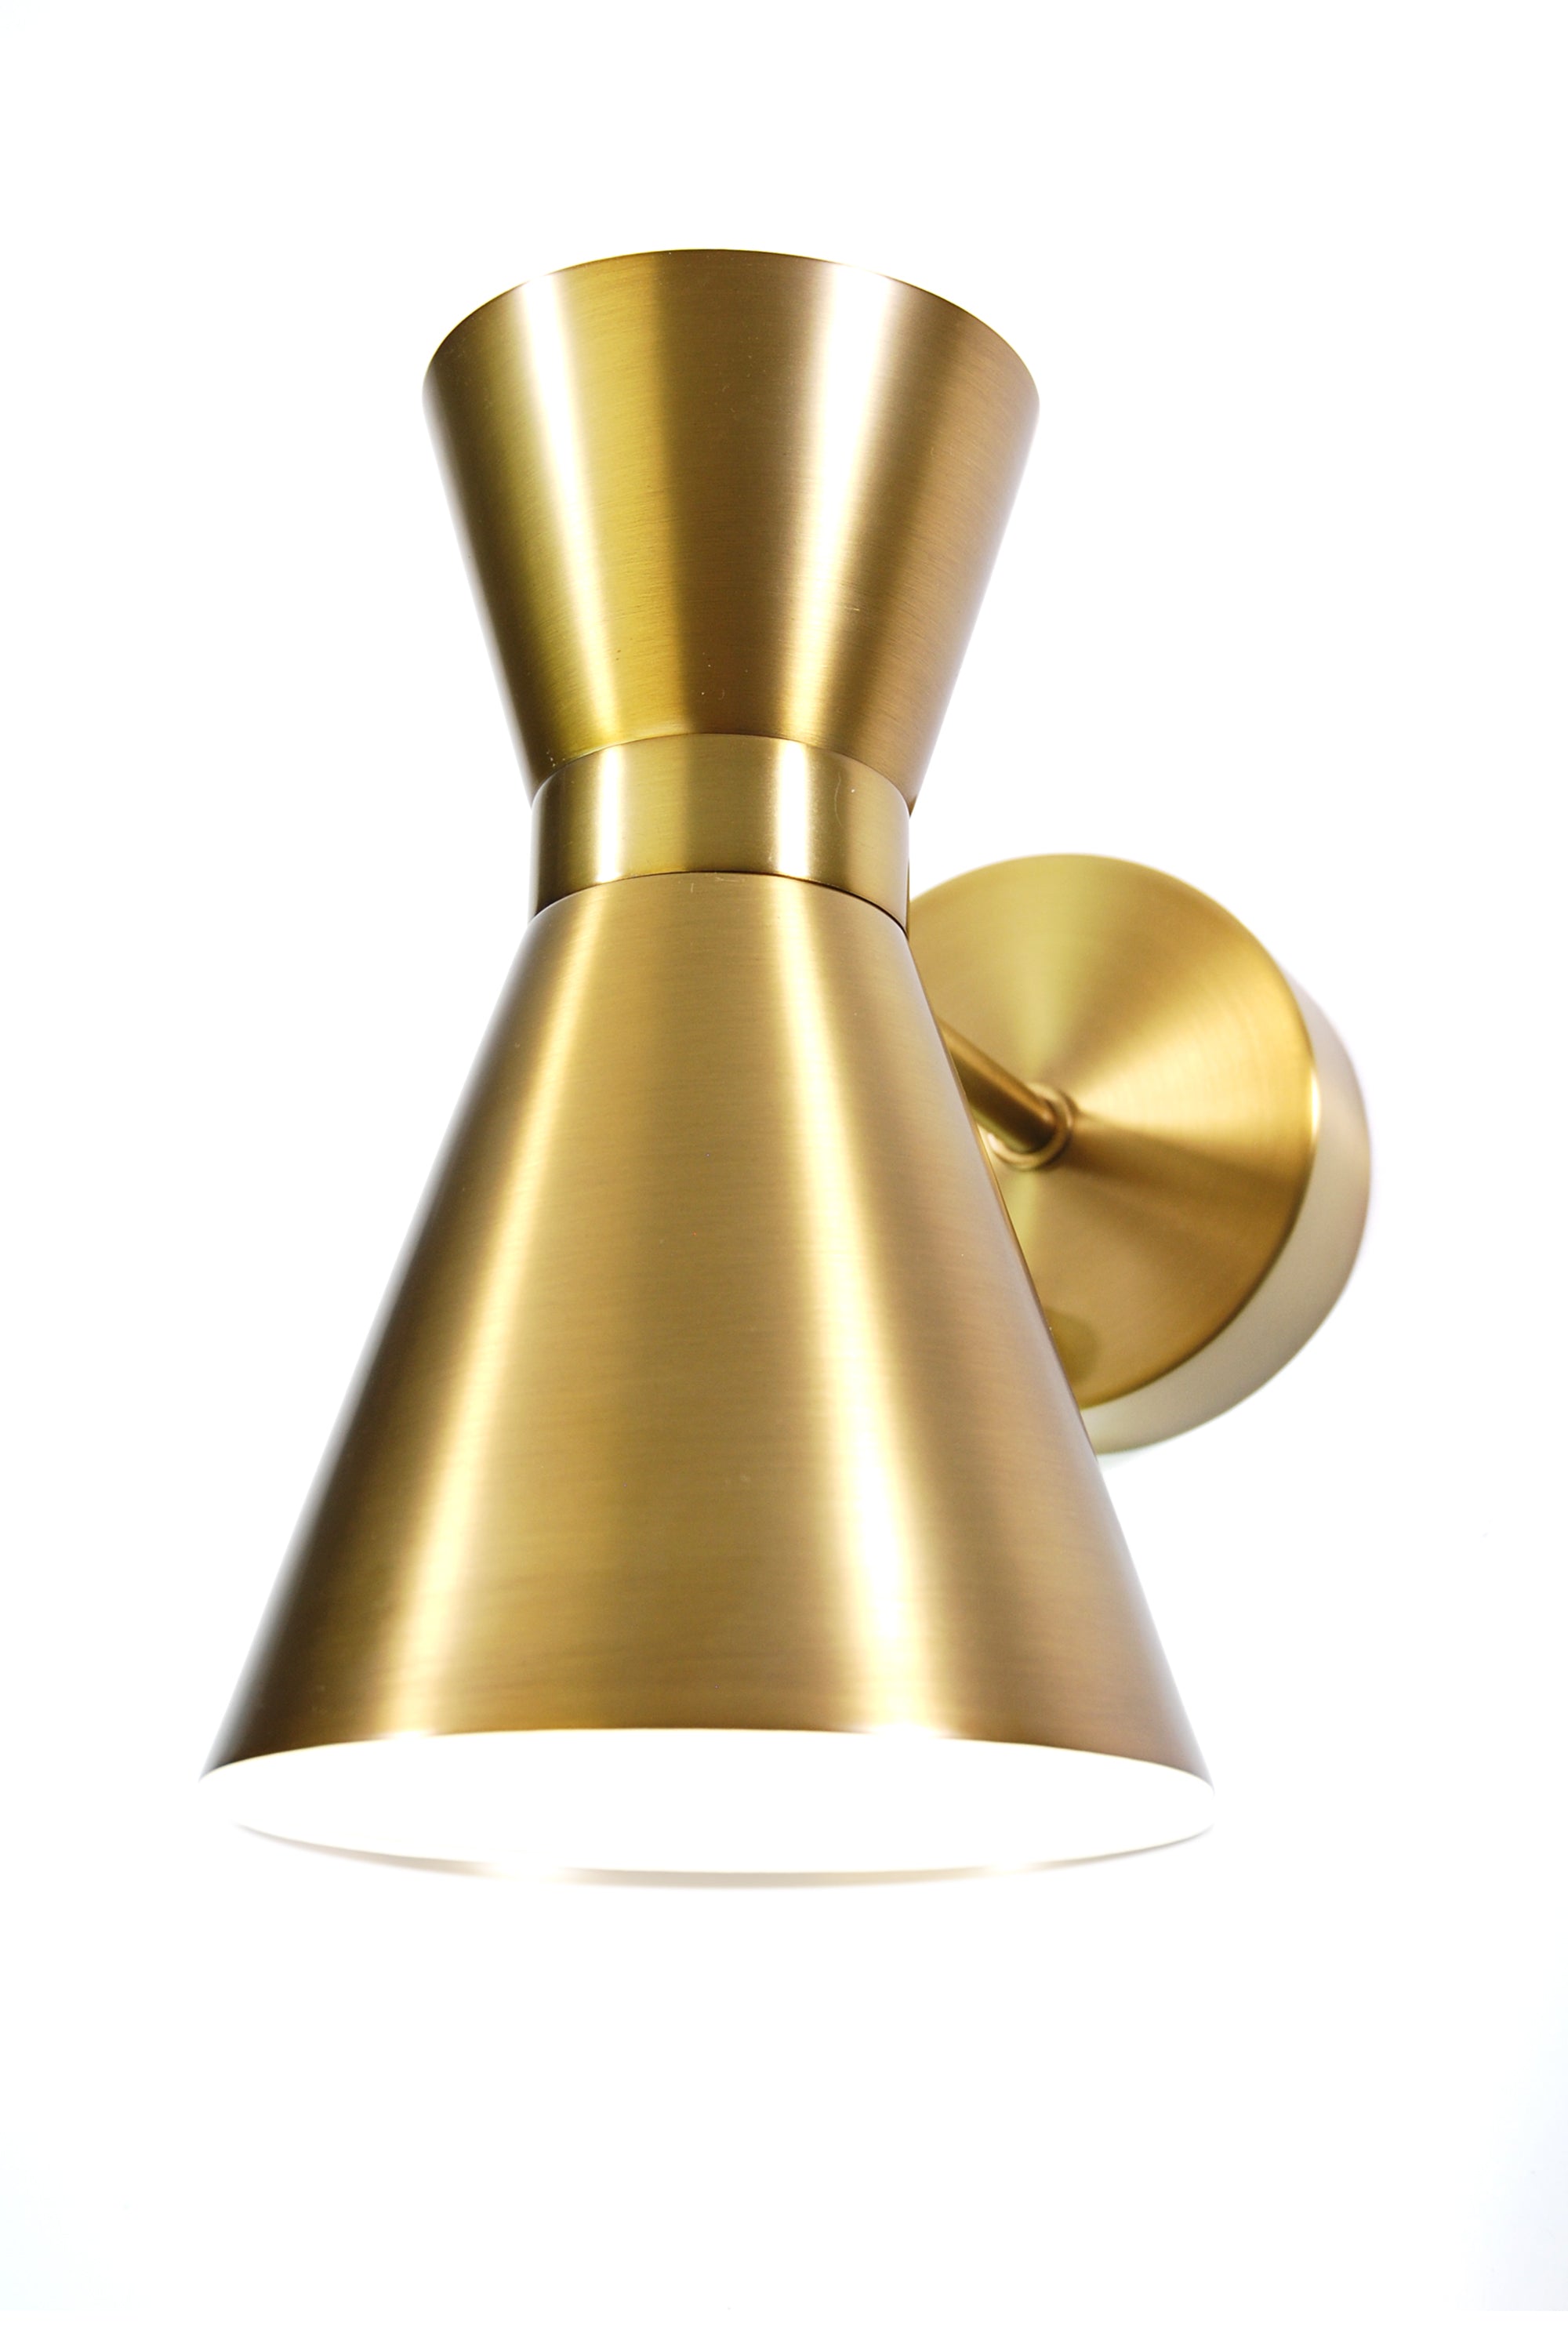 27 Best Wall Sconces